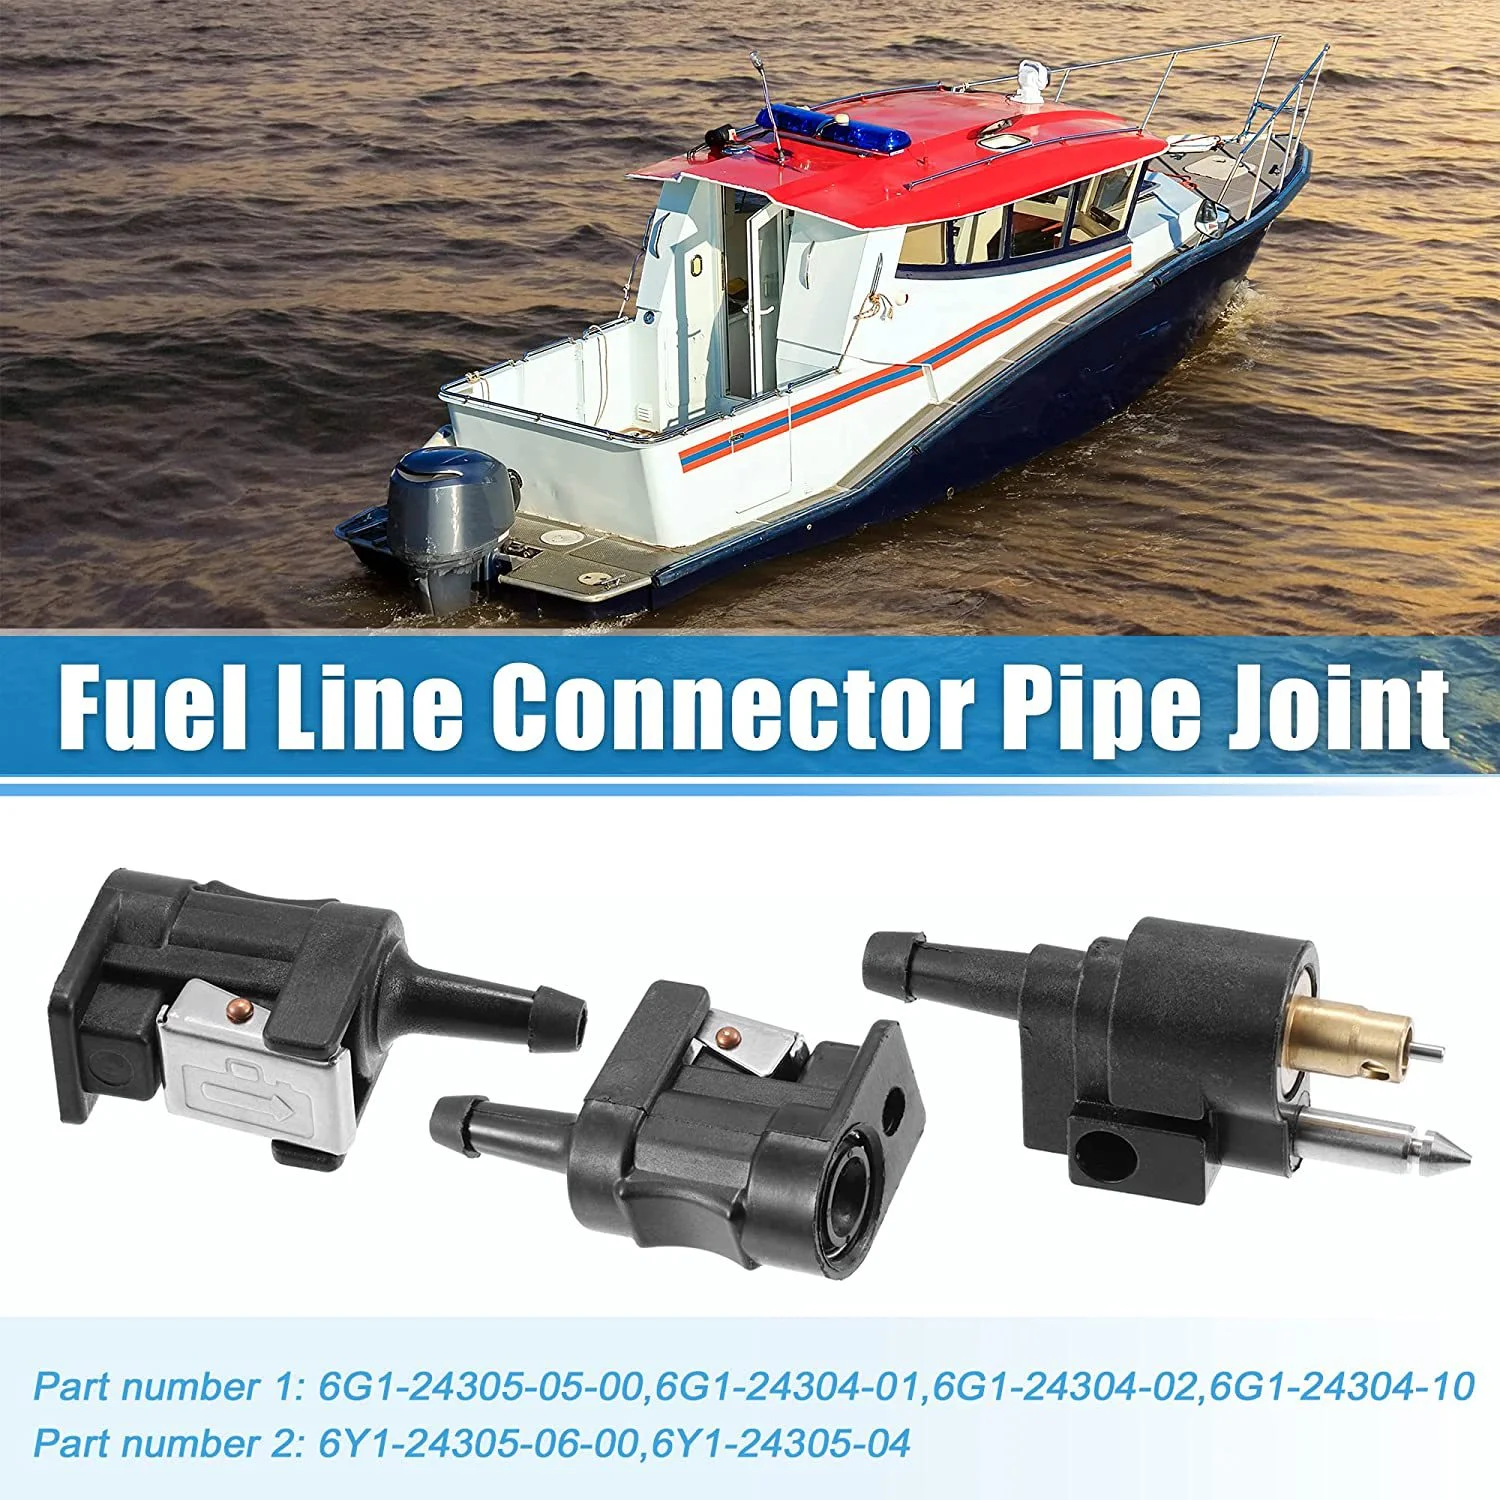 Marine Outboard Oil Tank Fuel Line Male/ Female Sockets Quick Coupling Yachts/Fishing Boats/Fast Boats/Cruise Ships Accessories fishing barents sea line and net ships misc games pc